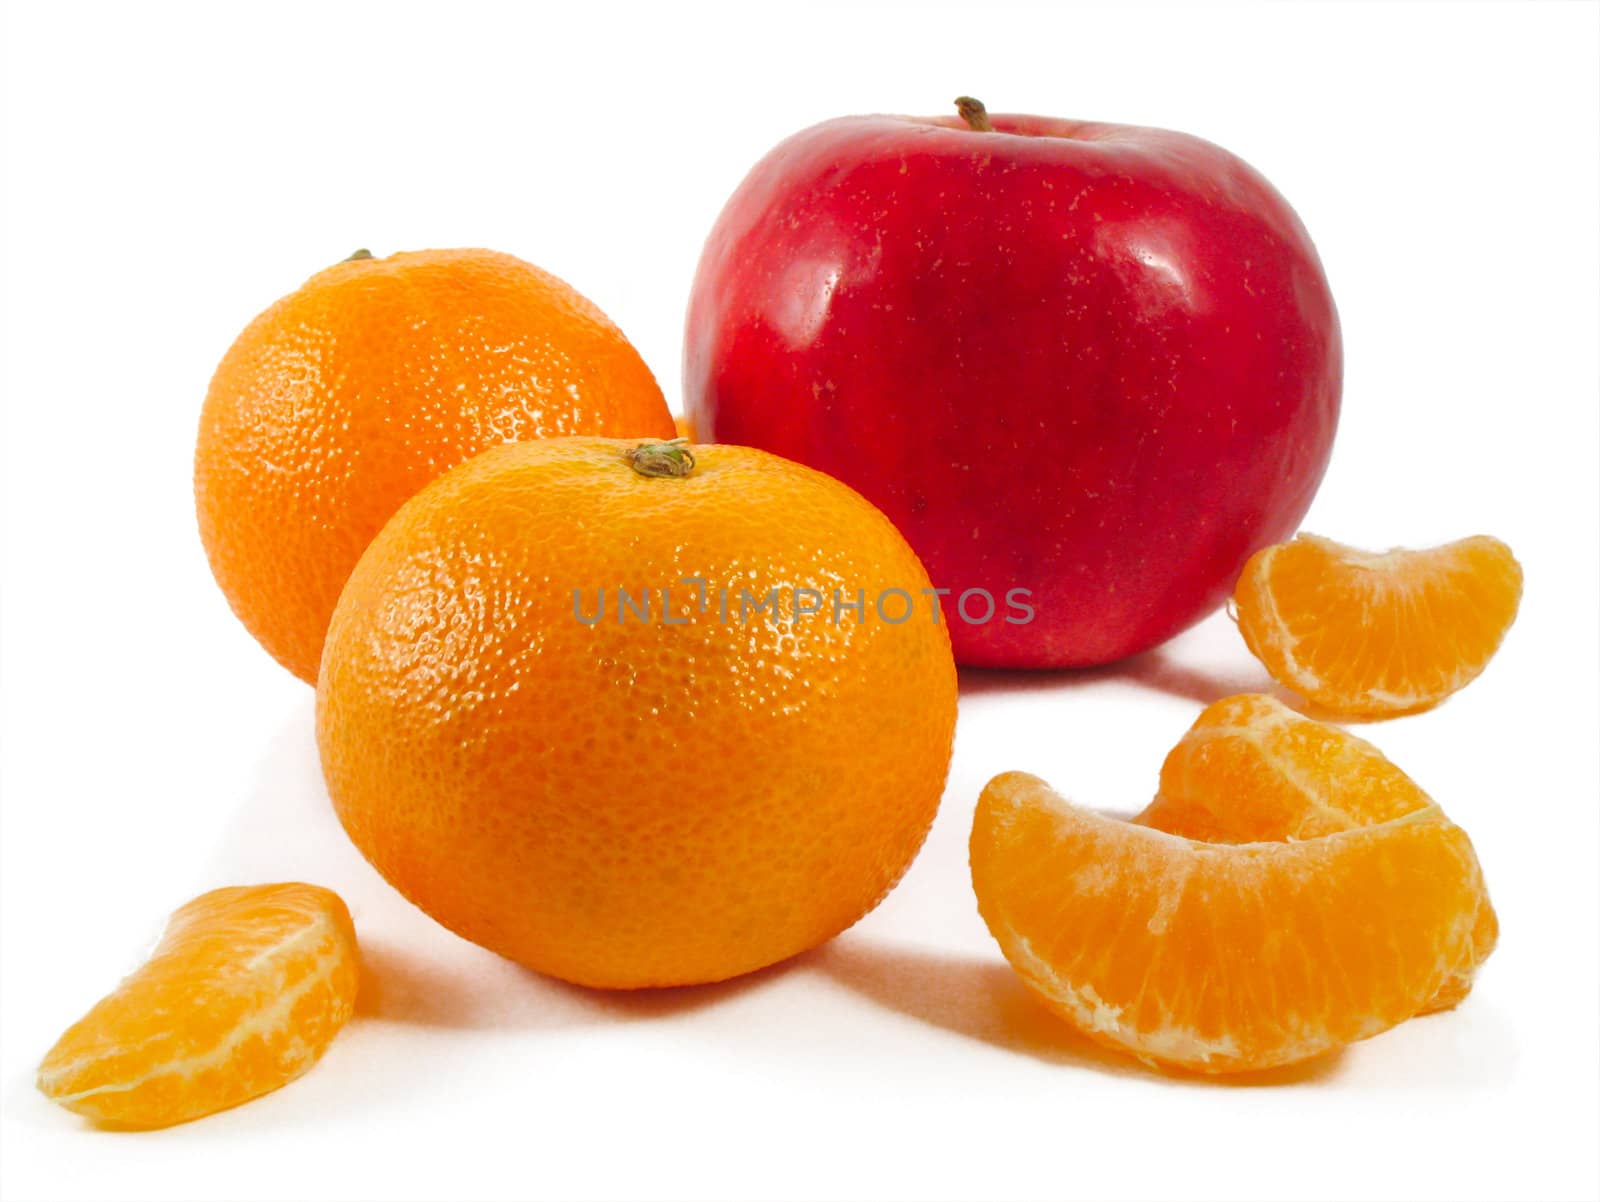 mandarines and red apple on a white background